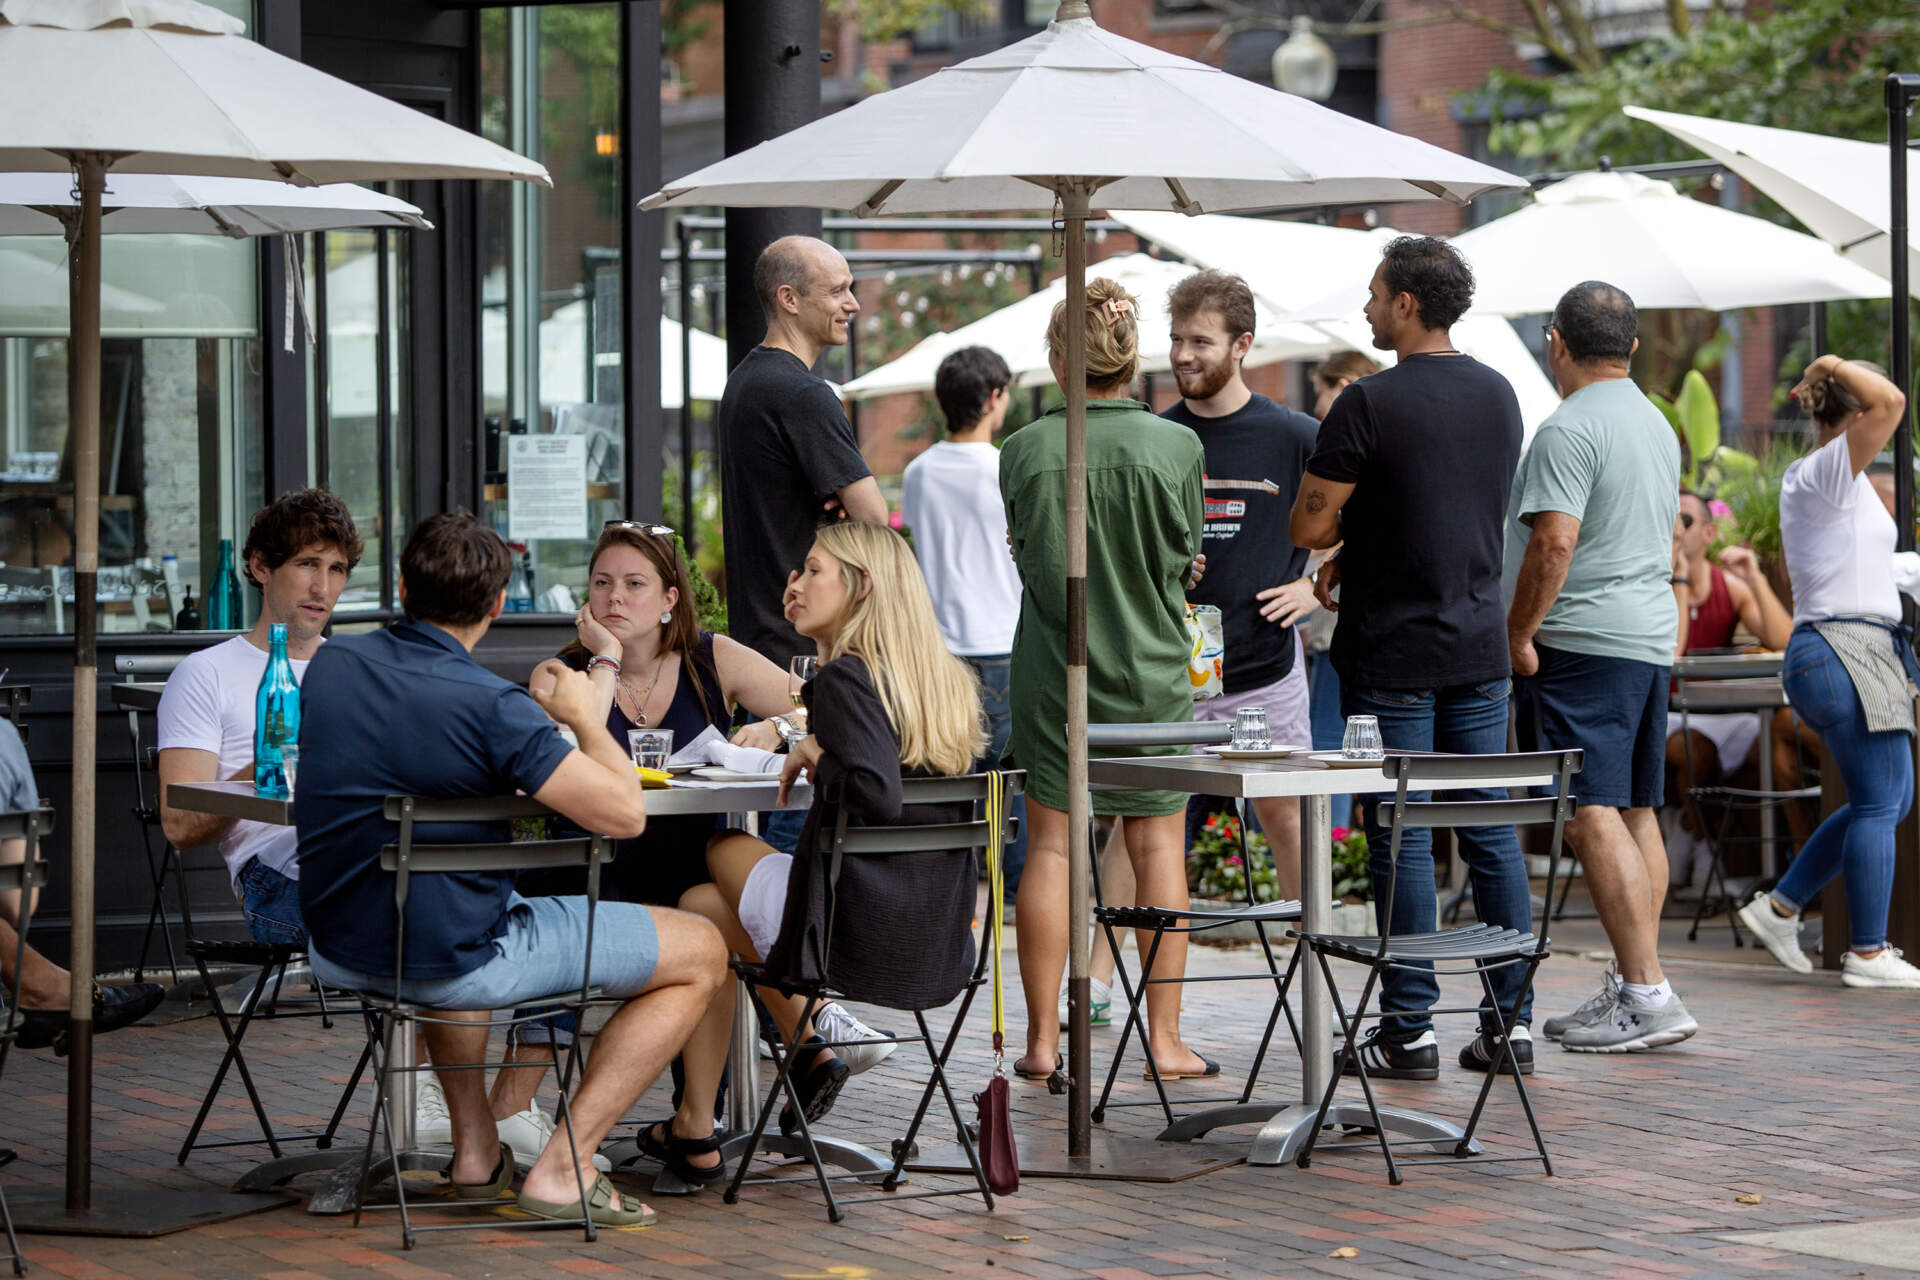 People gather at lunchtime by Kava on Shawmut Avenue in Boston. (Robin Lubbock/WBUR)